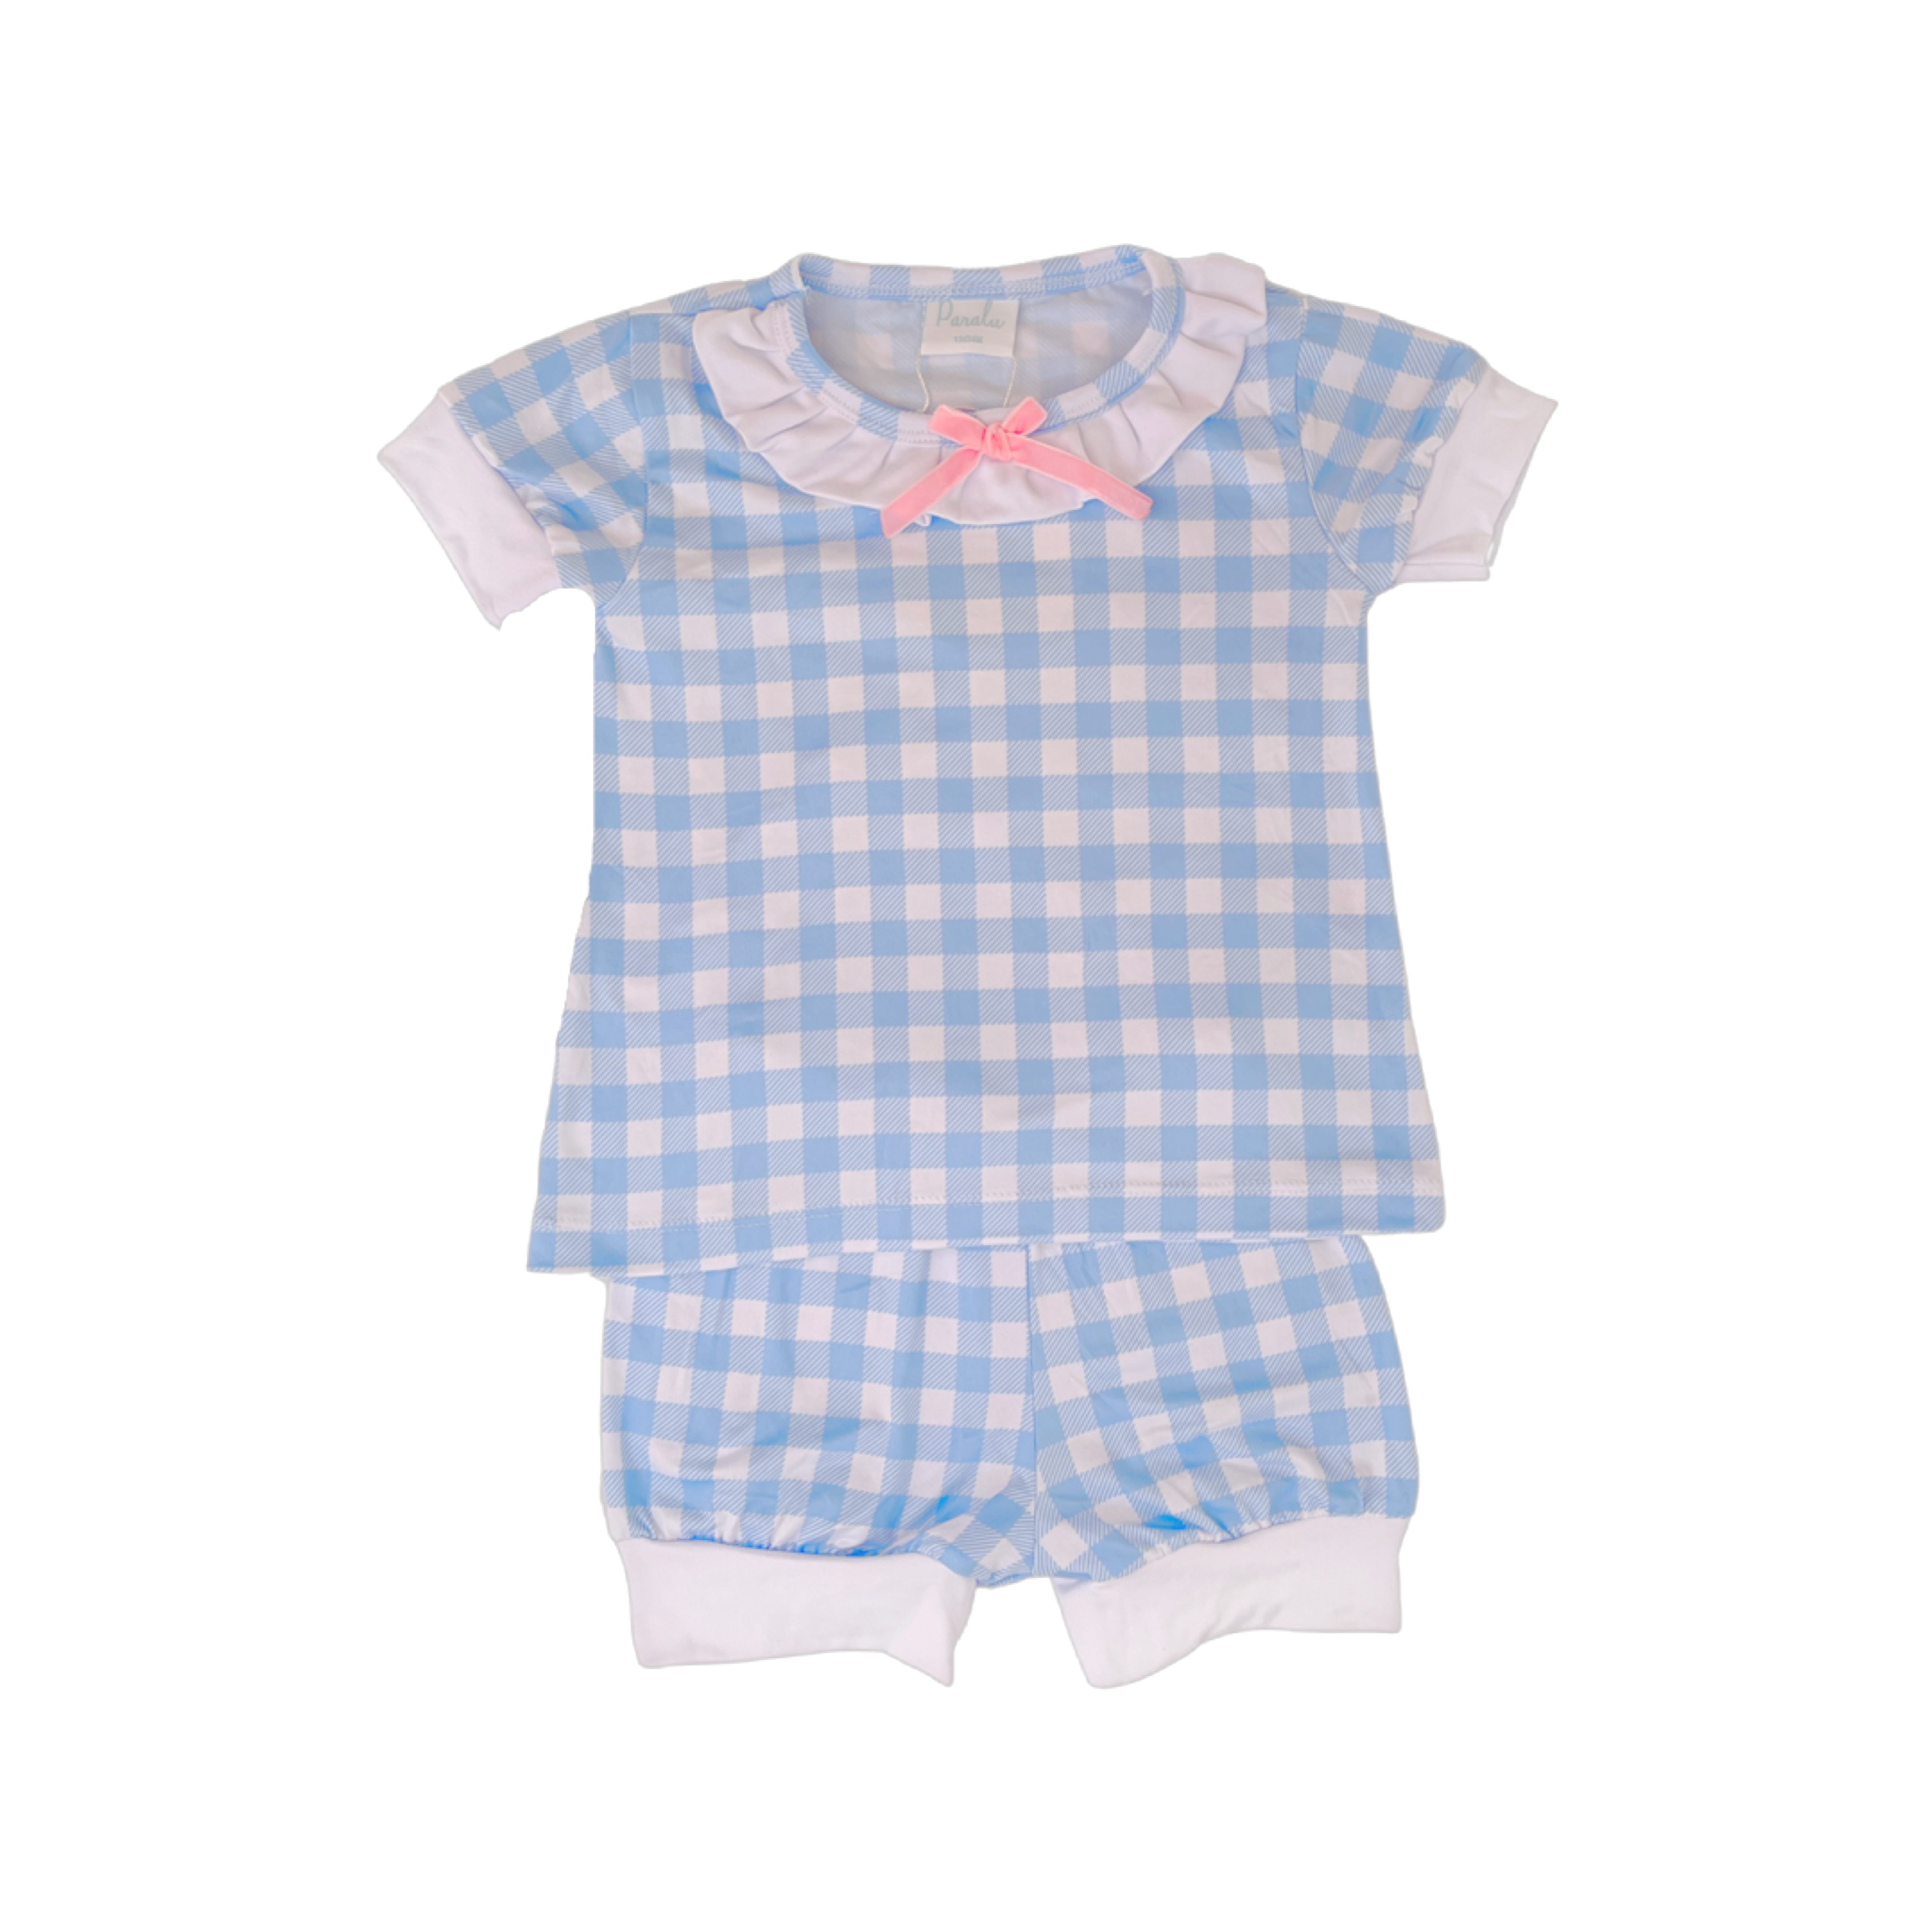 Blueberry Pie Set  Gingham tops, Fashion, Cute outfits